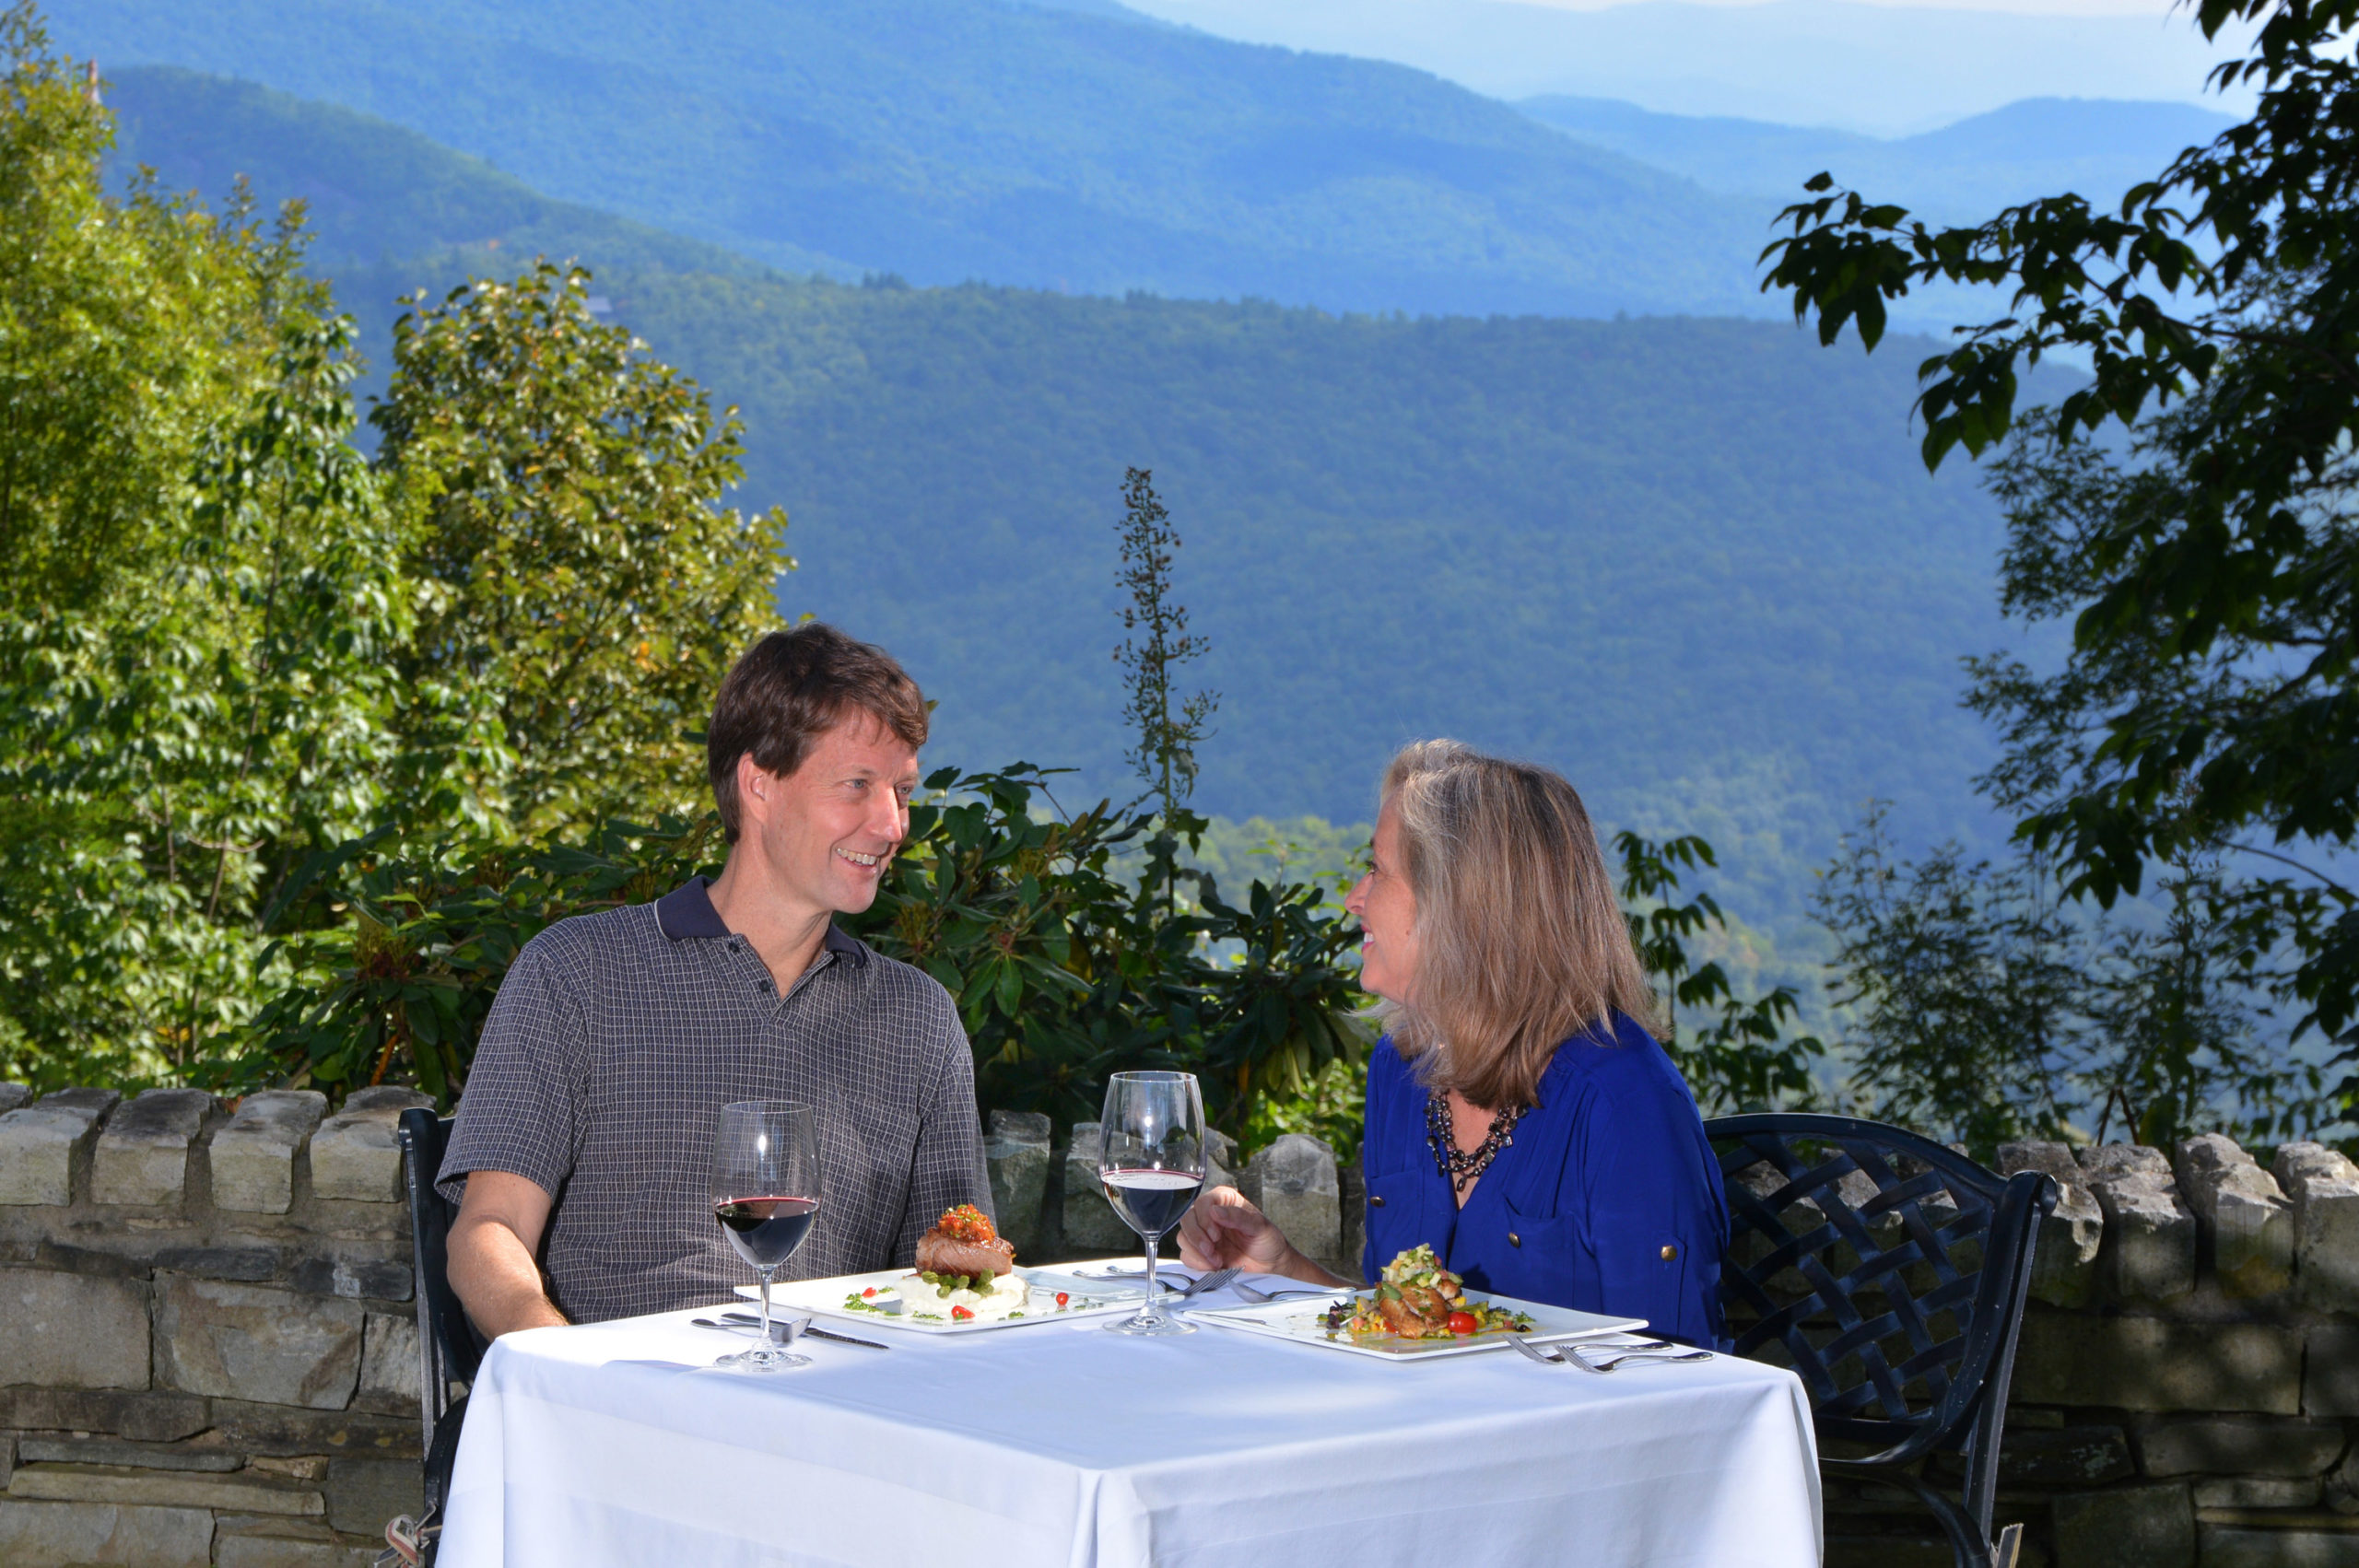 Couple dines outdoors in a mountain setting.